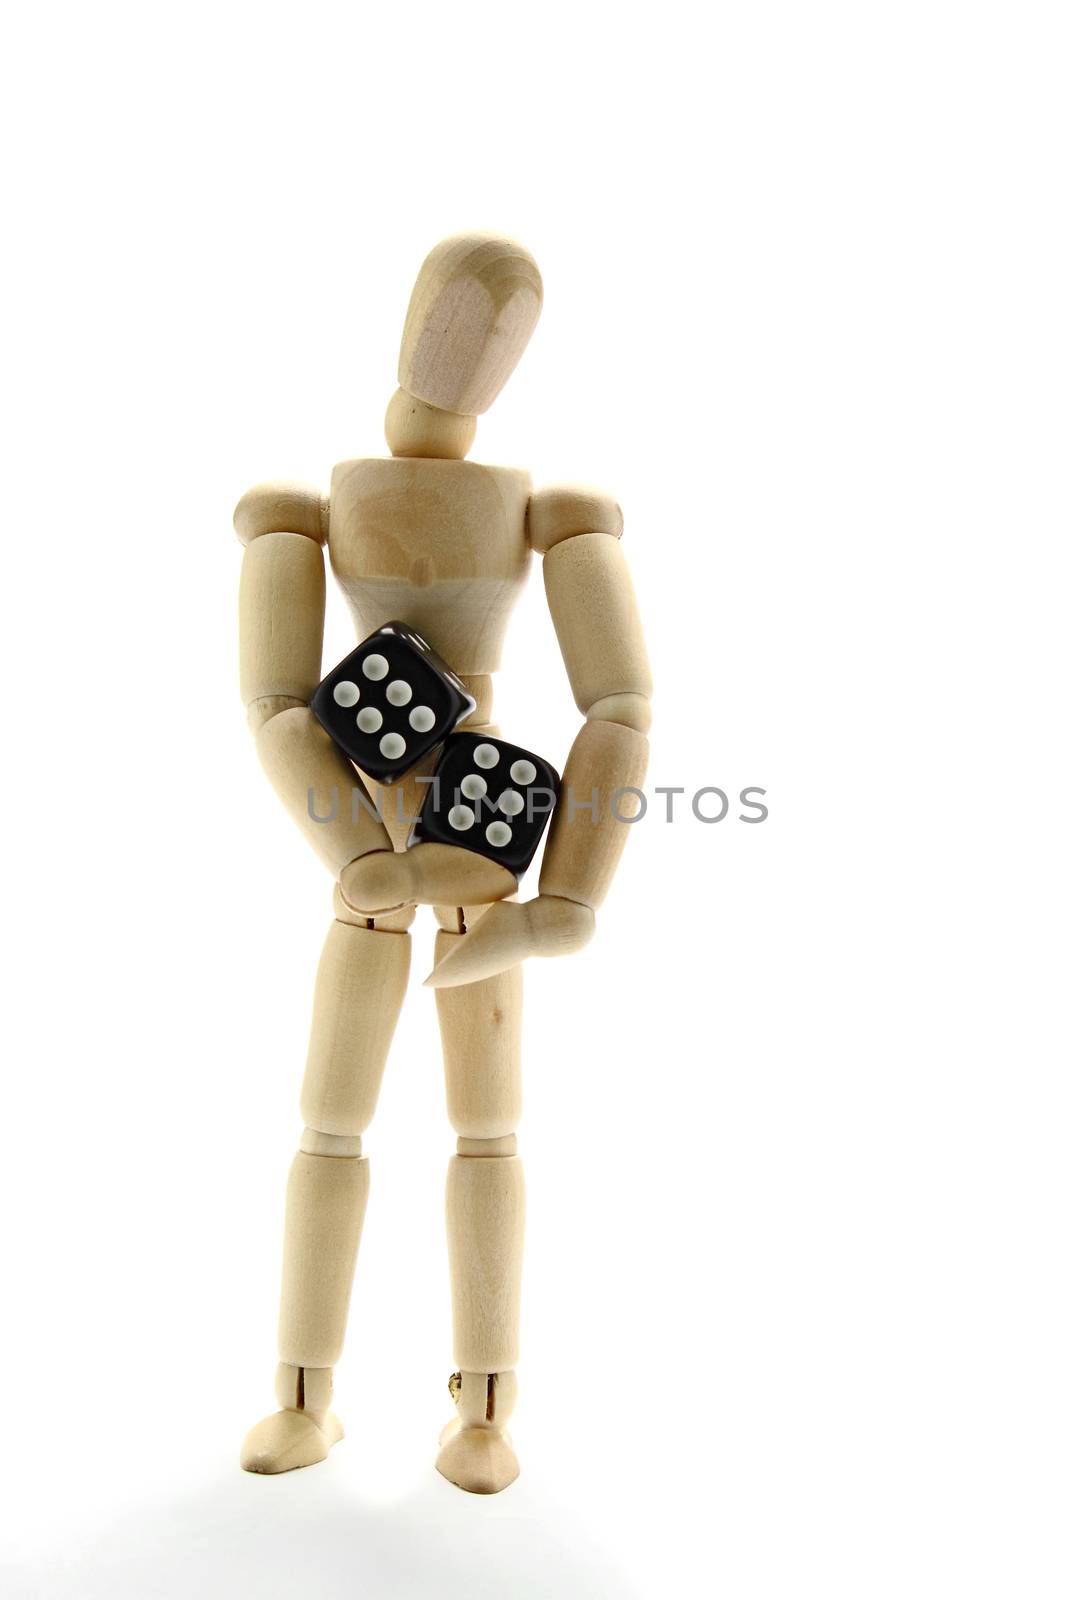 Puppet and dice by dynamicfoto